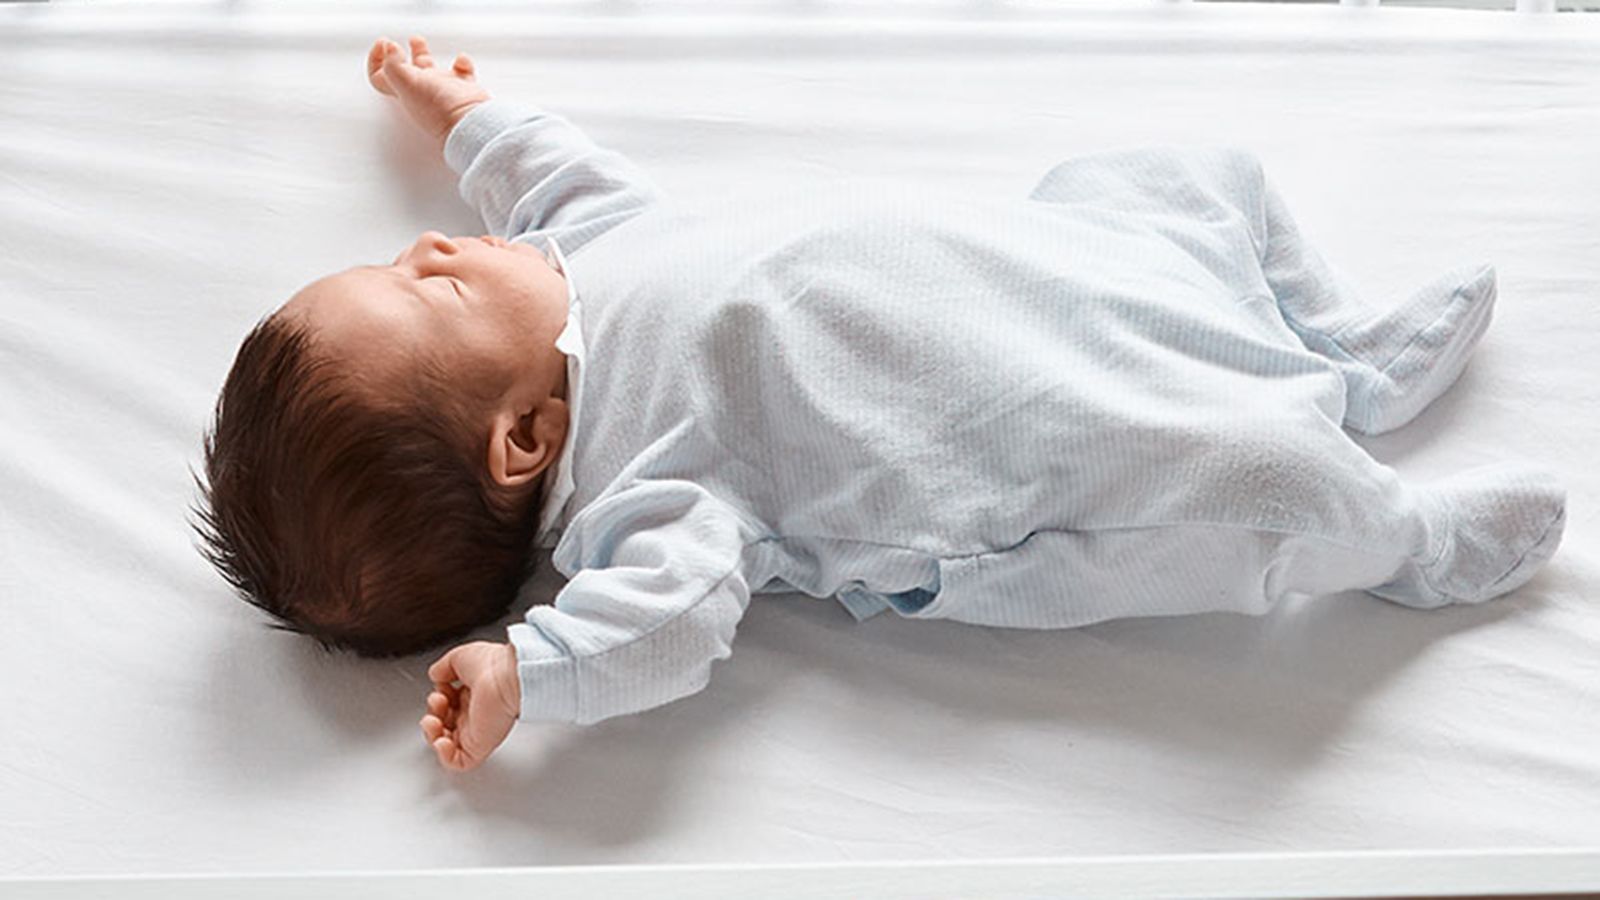 When should parents introduce pillows to their babies?